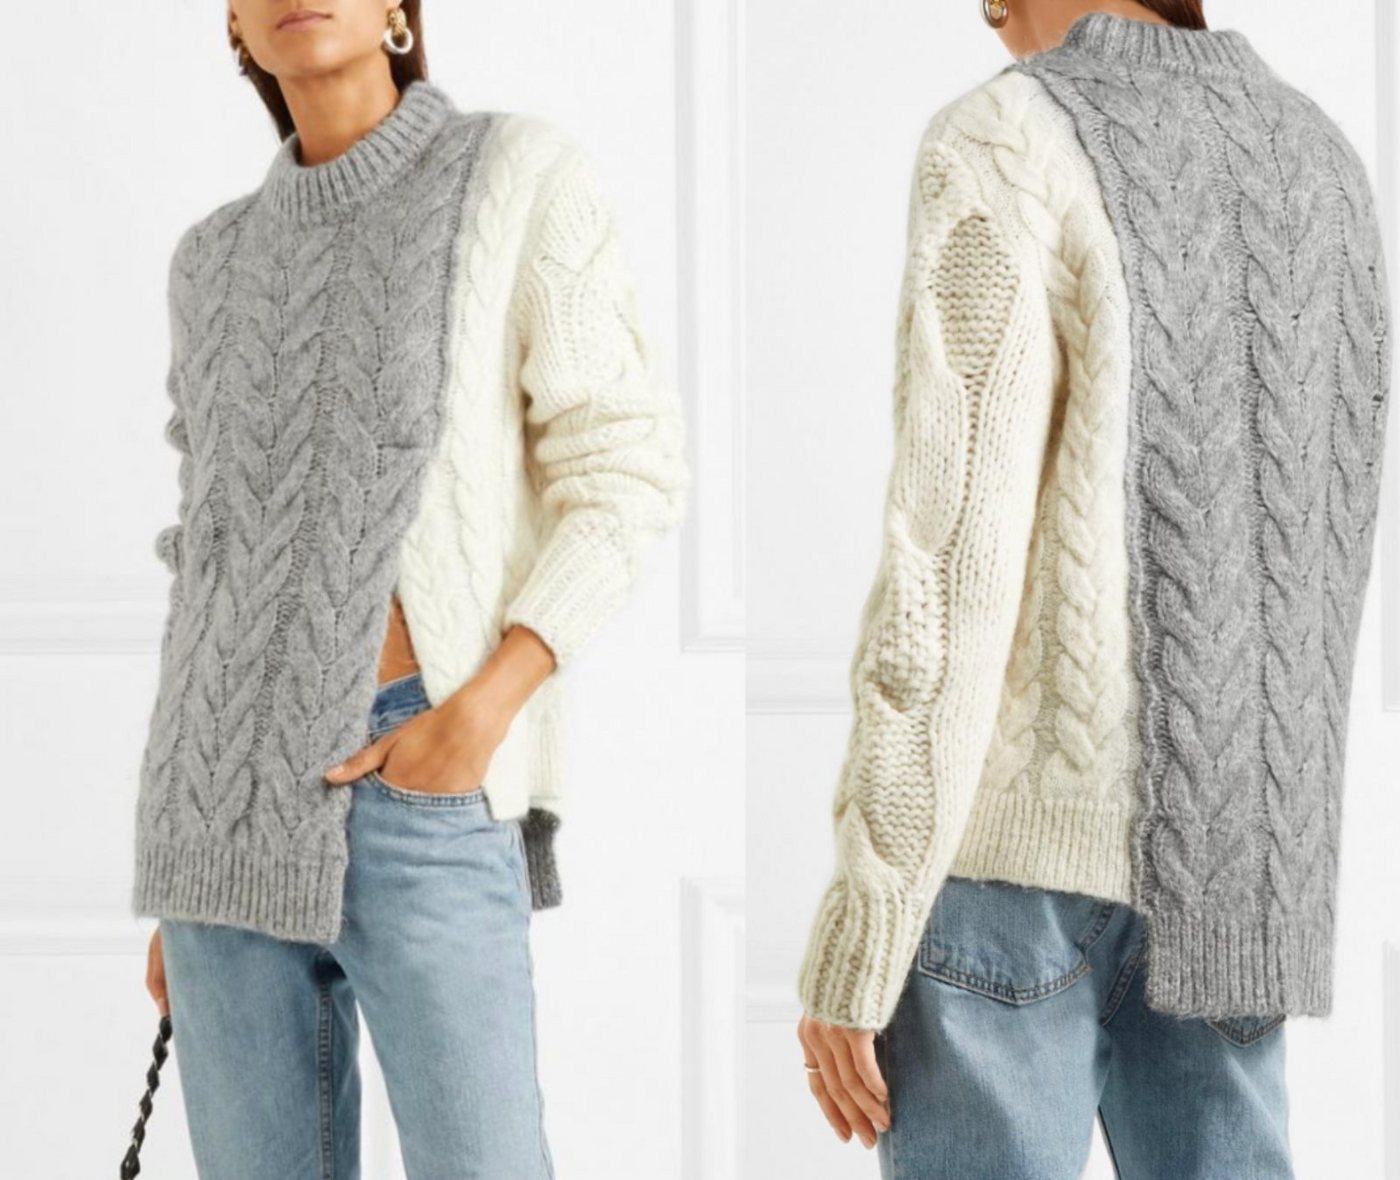 MONCLER Strickpullover MONCLER KNITWEAR Two-tone cable-knit Sweater Jumper Strick-Pulli Pullo von MONCLER